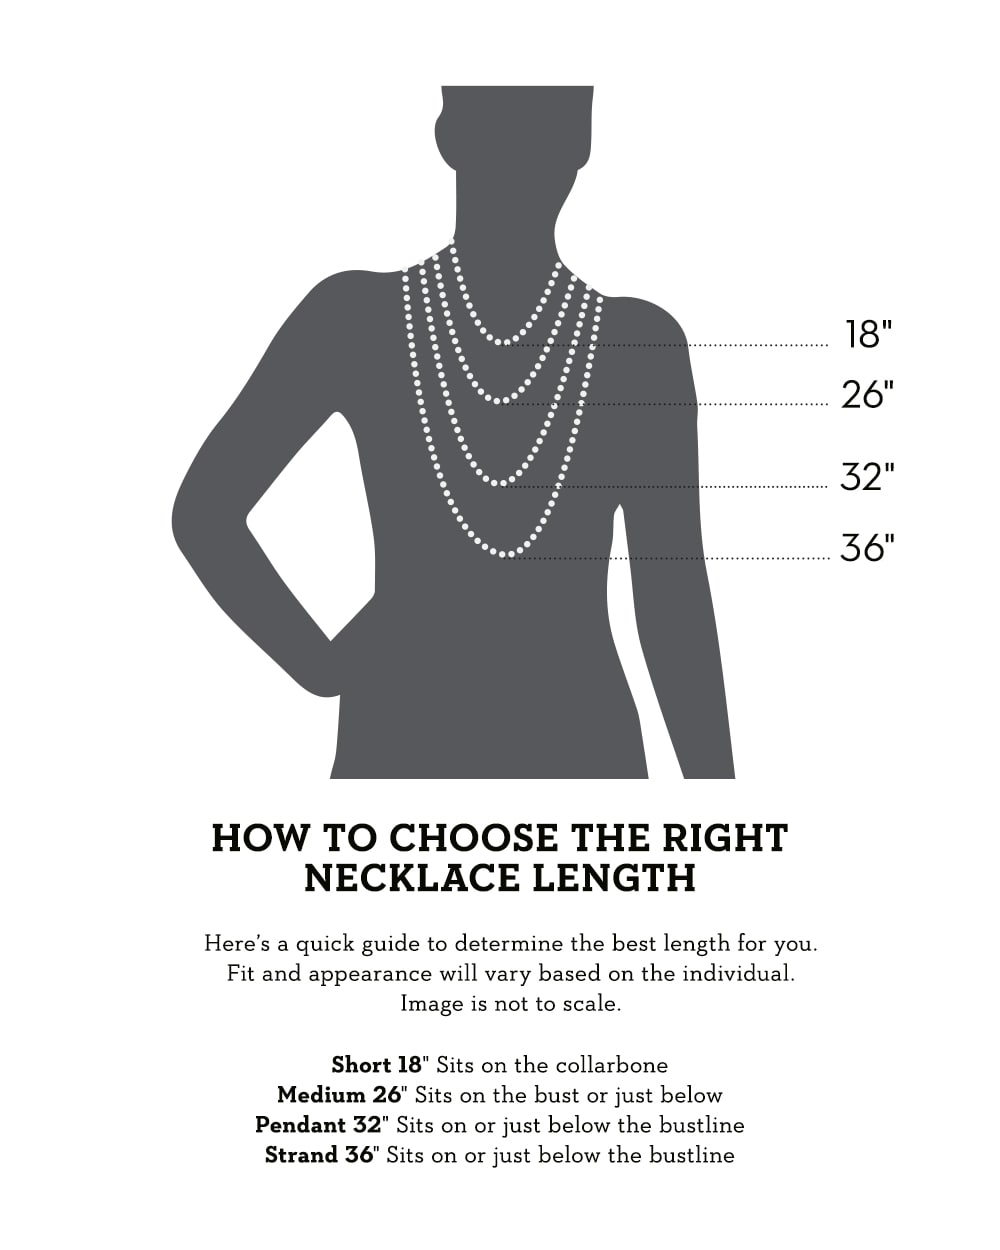 How to choose the right necklace length. Here's a quick guide to determine the best length for you. Fit and appearance will vary based on the individual. Image is not to scale. Short 18 inches sits on the collarbone. Medium 26 inches sits on the bust or just below. Pendant 32 inches sits on or just below the bustline. Strand 36 inches sits on or just below the bustline.